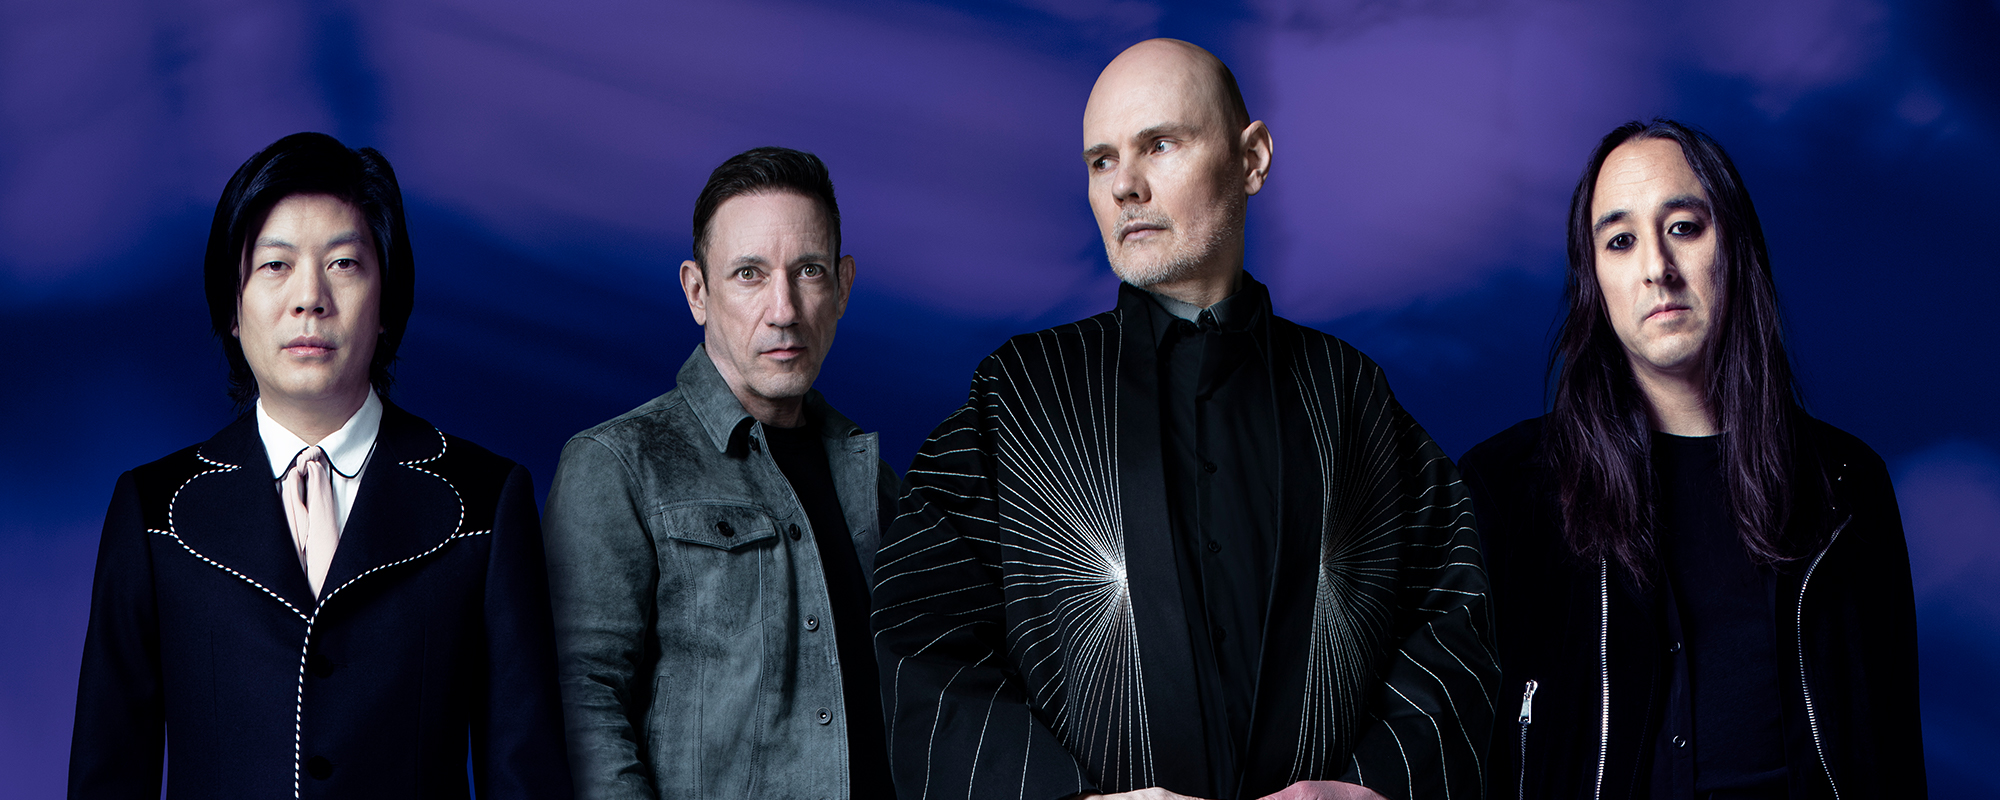 The Smashing Pumpkins Announce New Single “Beguiled,” New LP ‘ATUM’